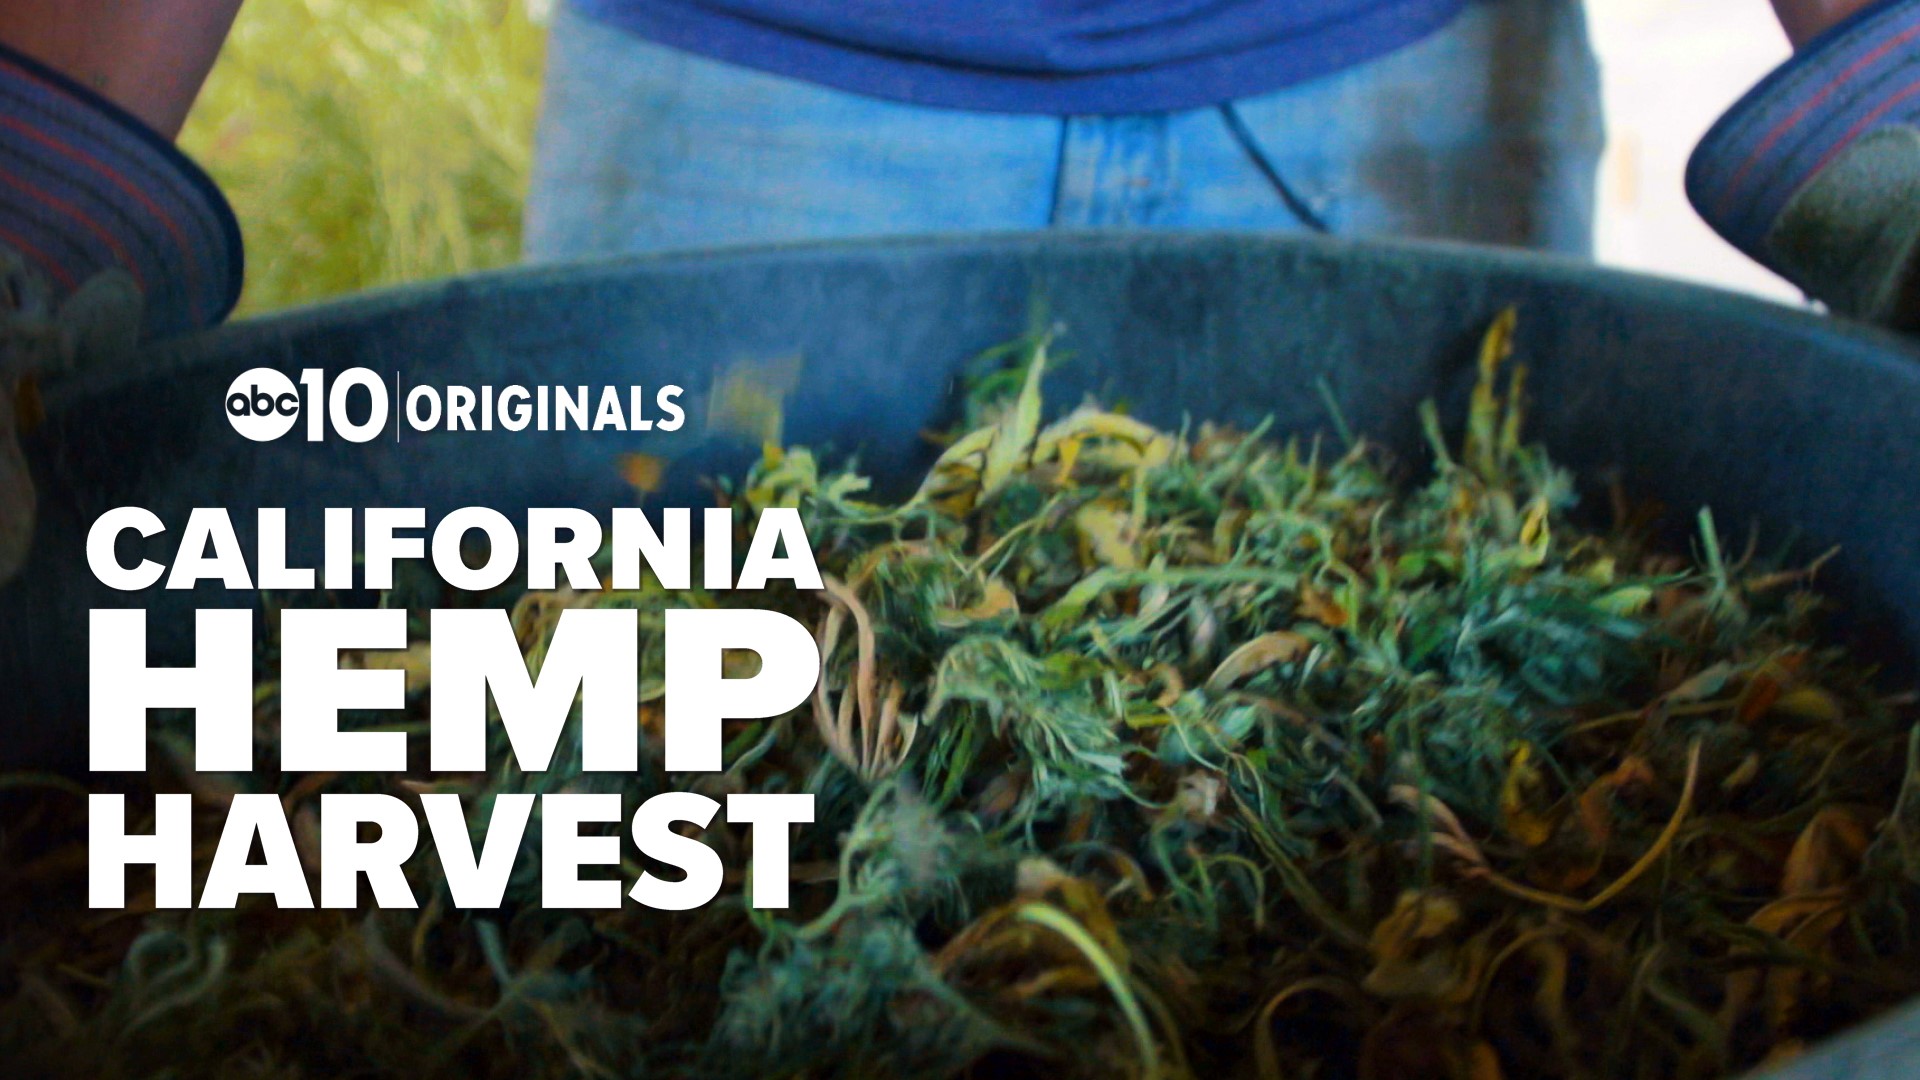 A Loyalton farmer just brought in Northern California's first legal harvest of hemp in over 80 years. John Bartell visited to find out more about this soon-to-be booming crop.